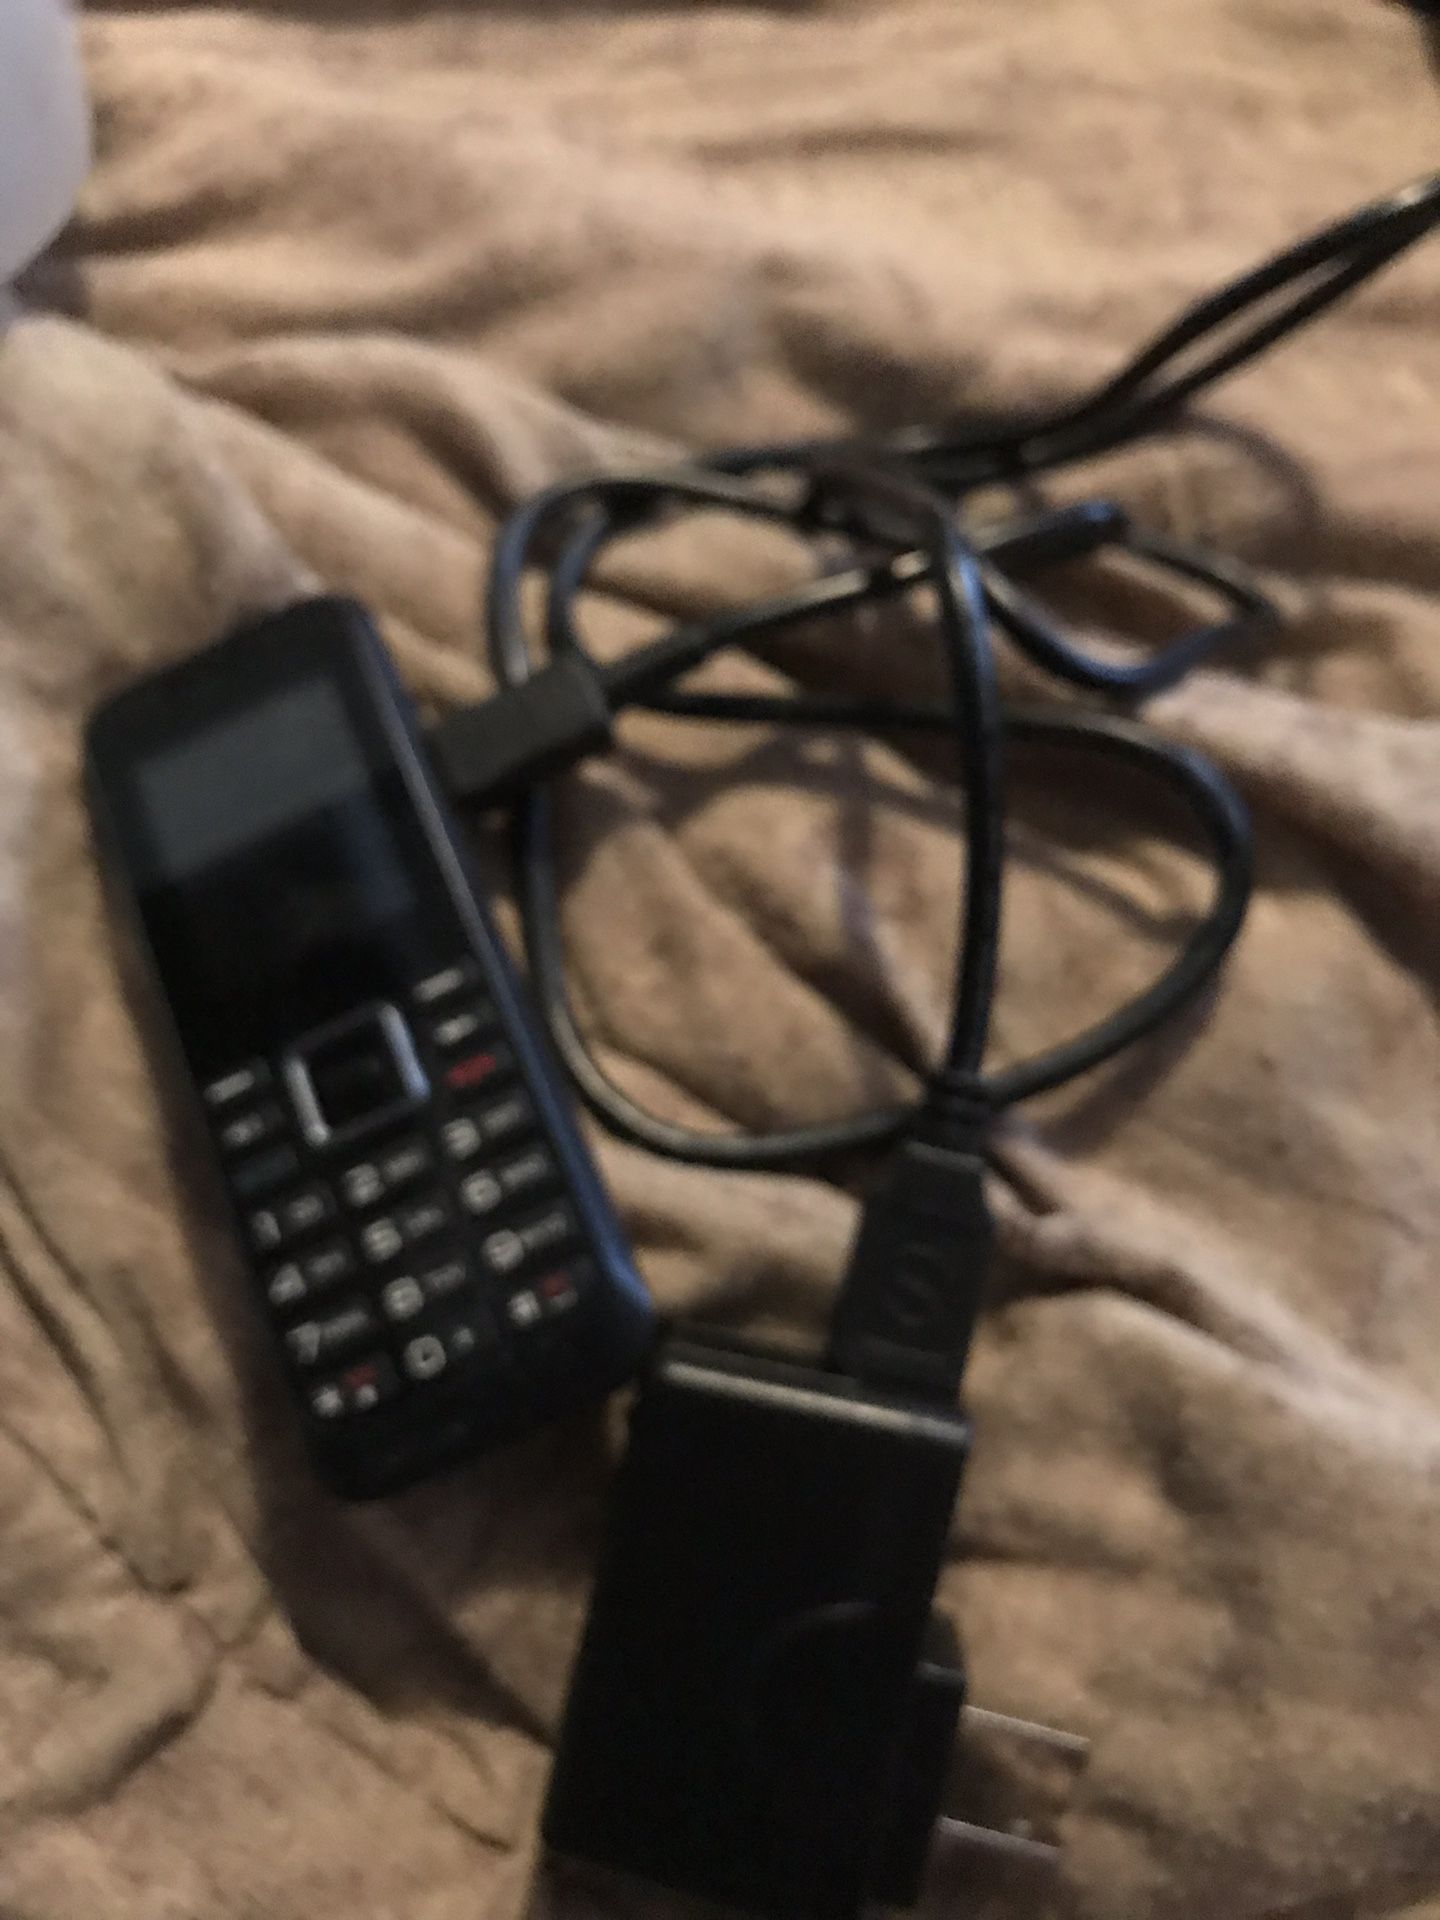 Government phone